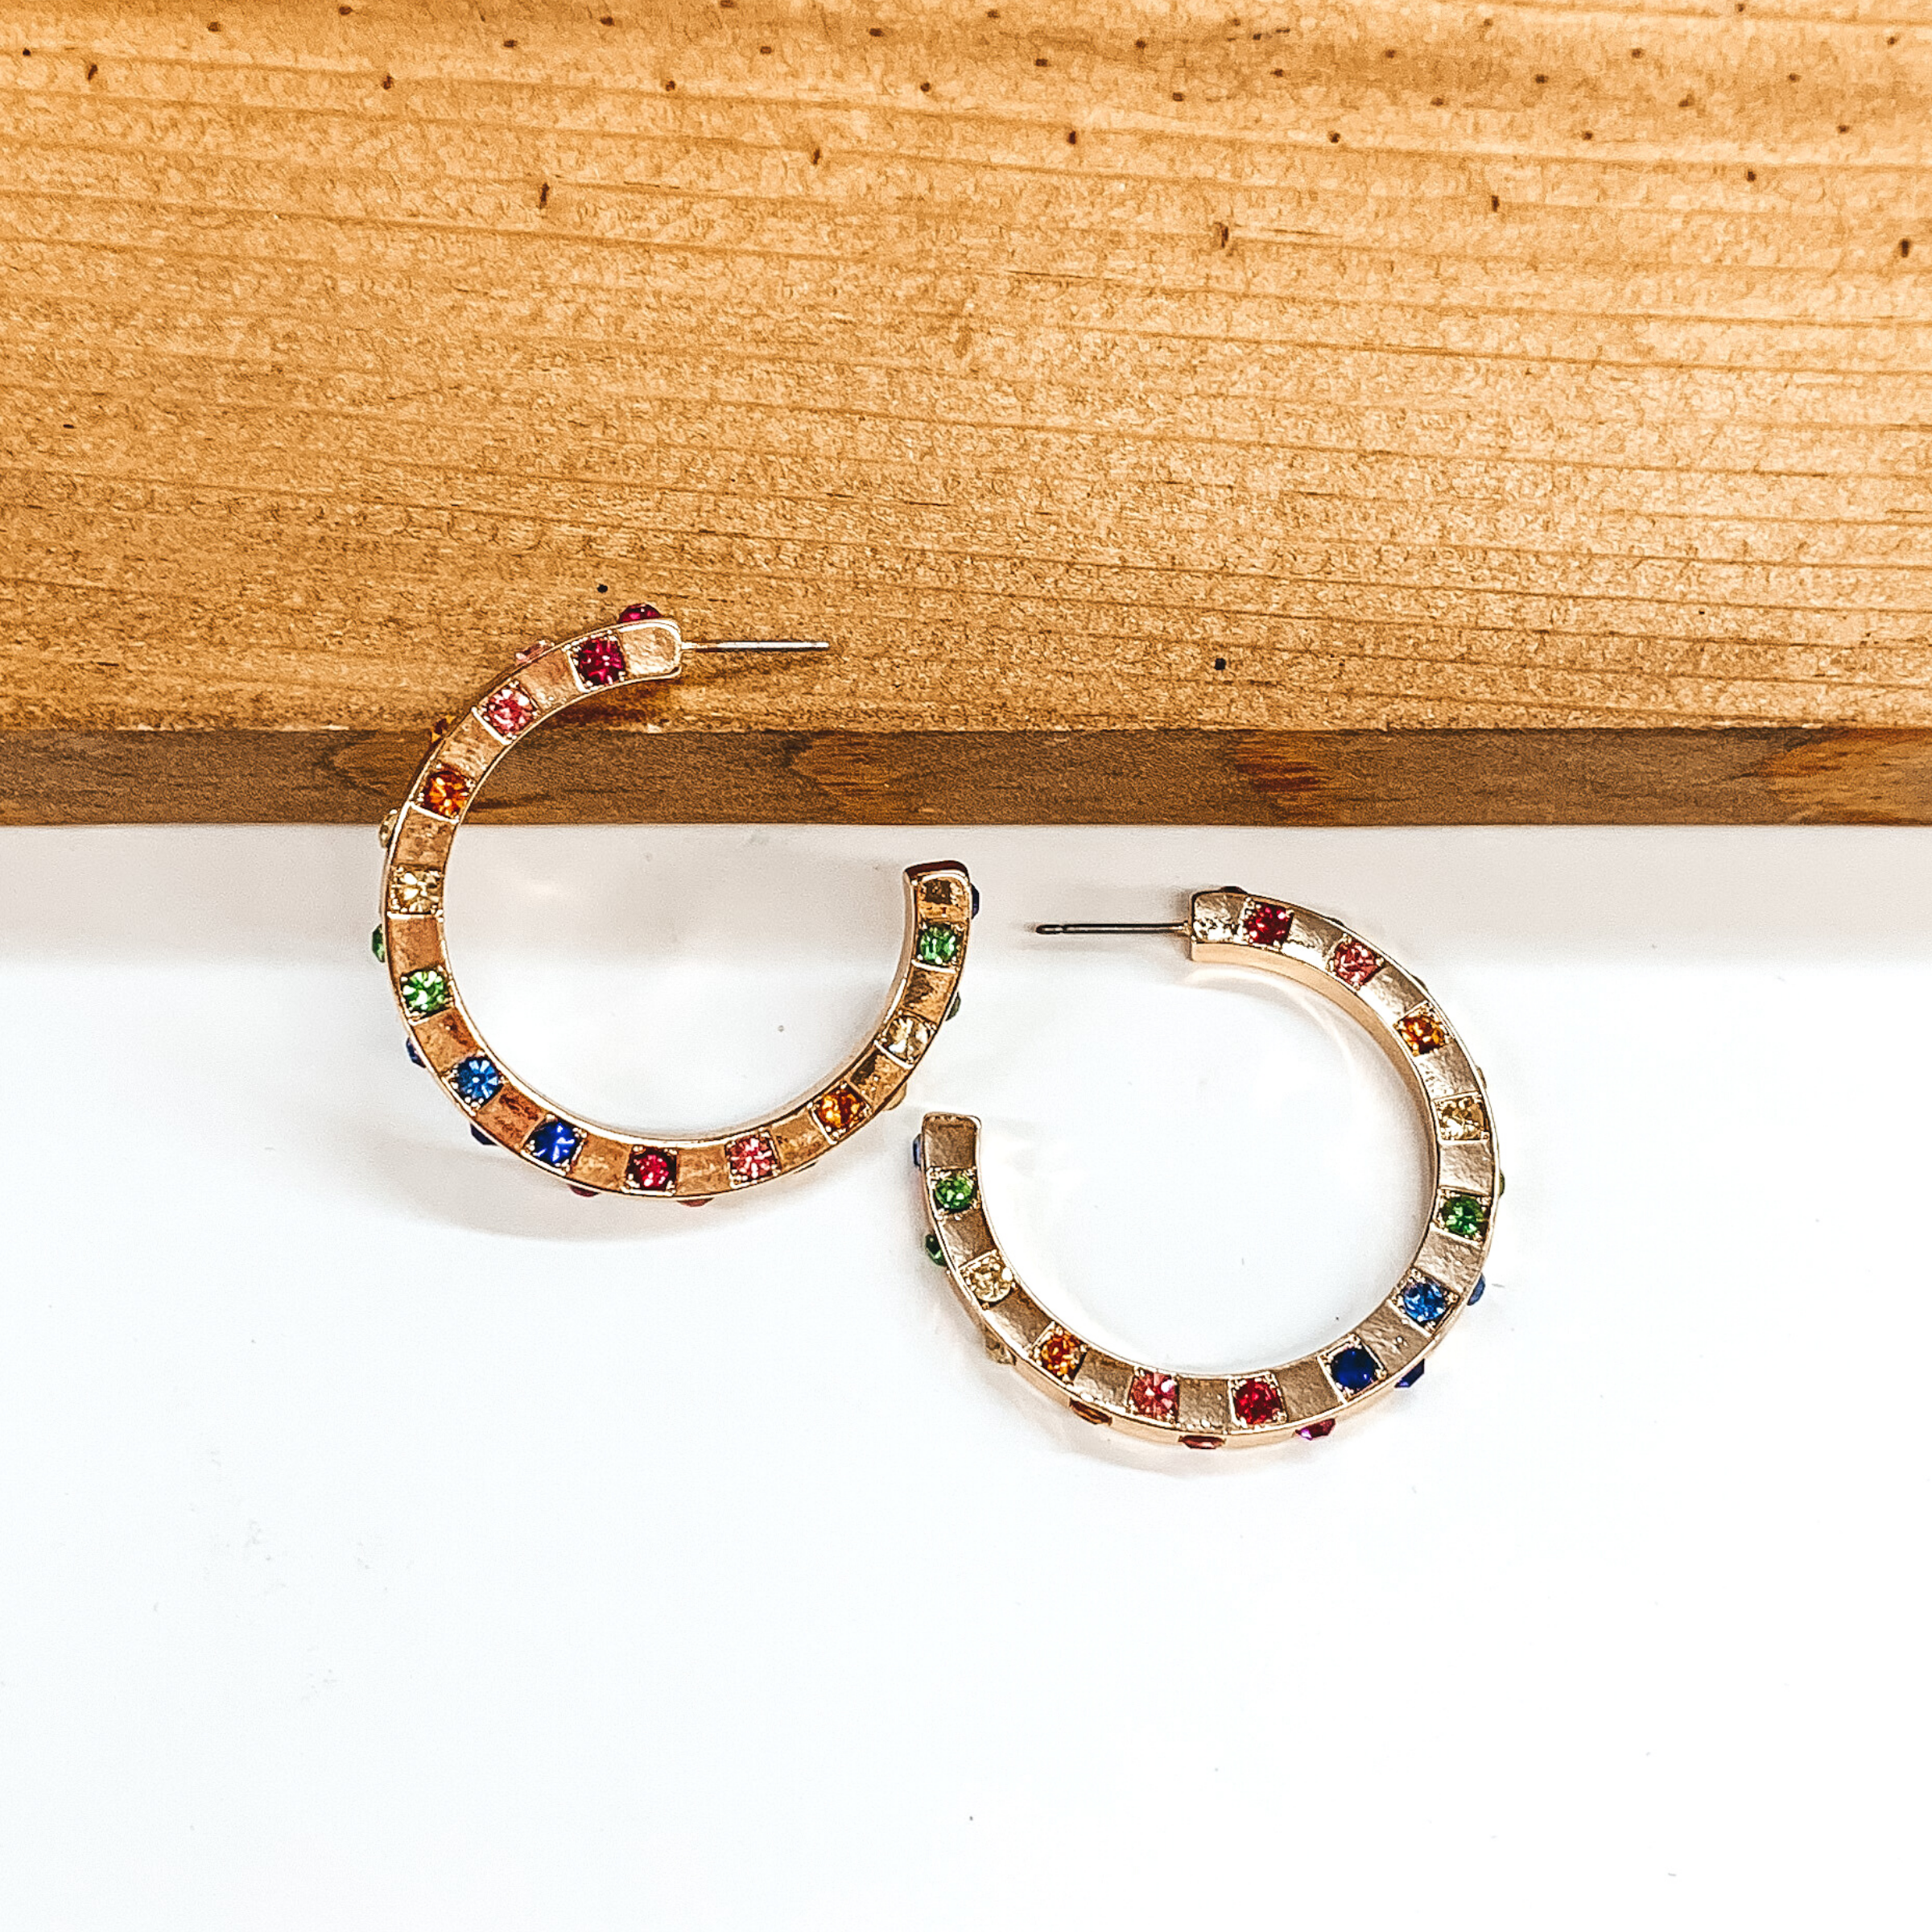 Gold hoop earrings with spaced out multicolored crystals. One earrings is pictured laying on a brown block while the other earrings is pictured laying flat on the white background.